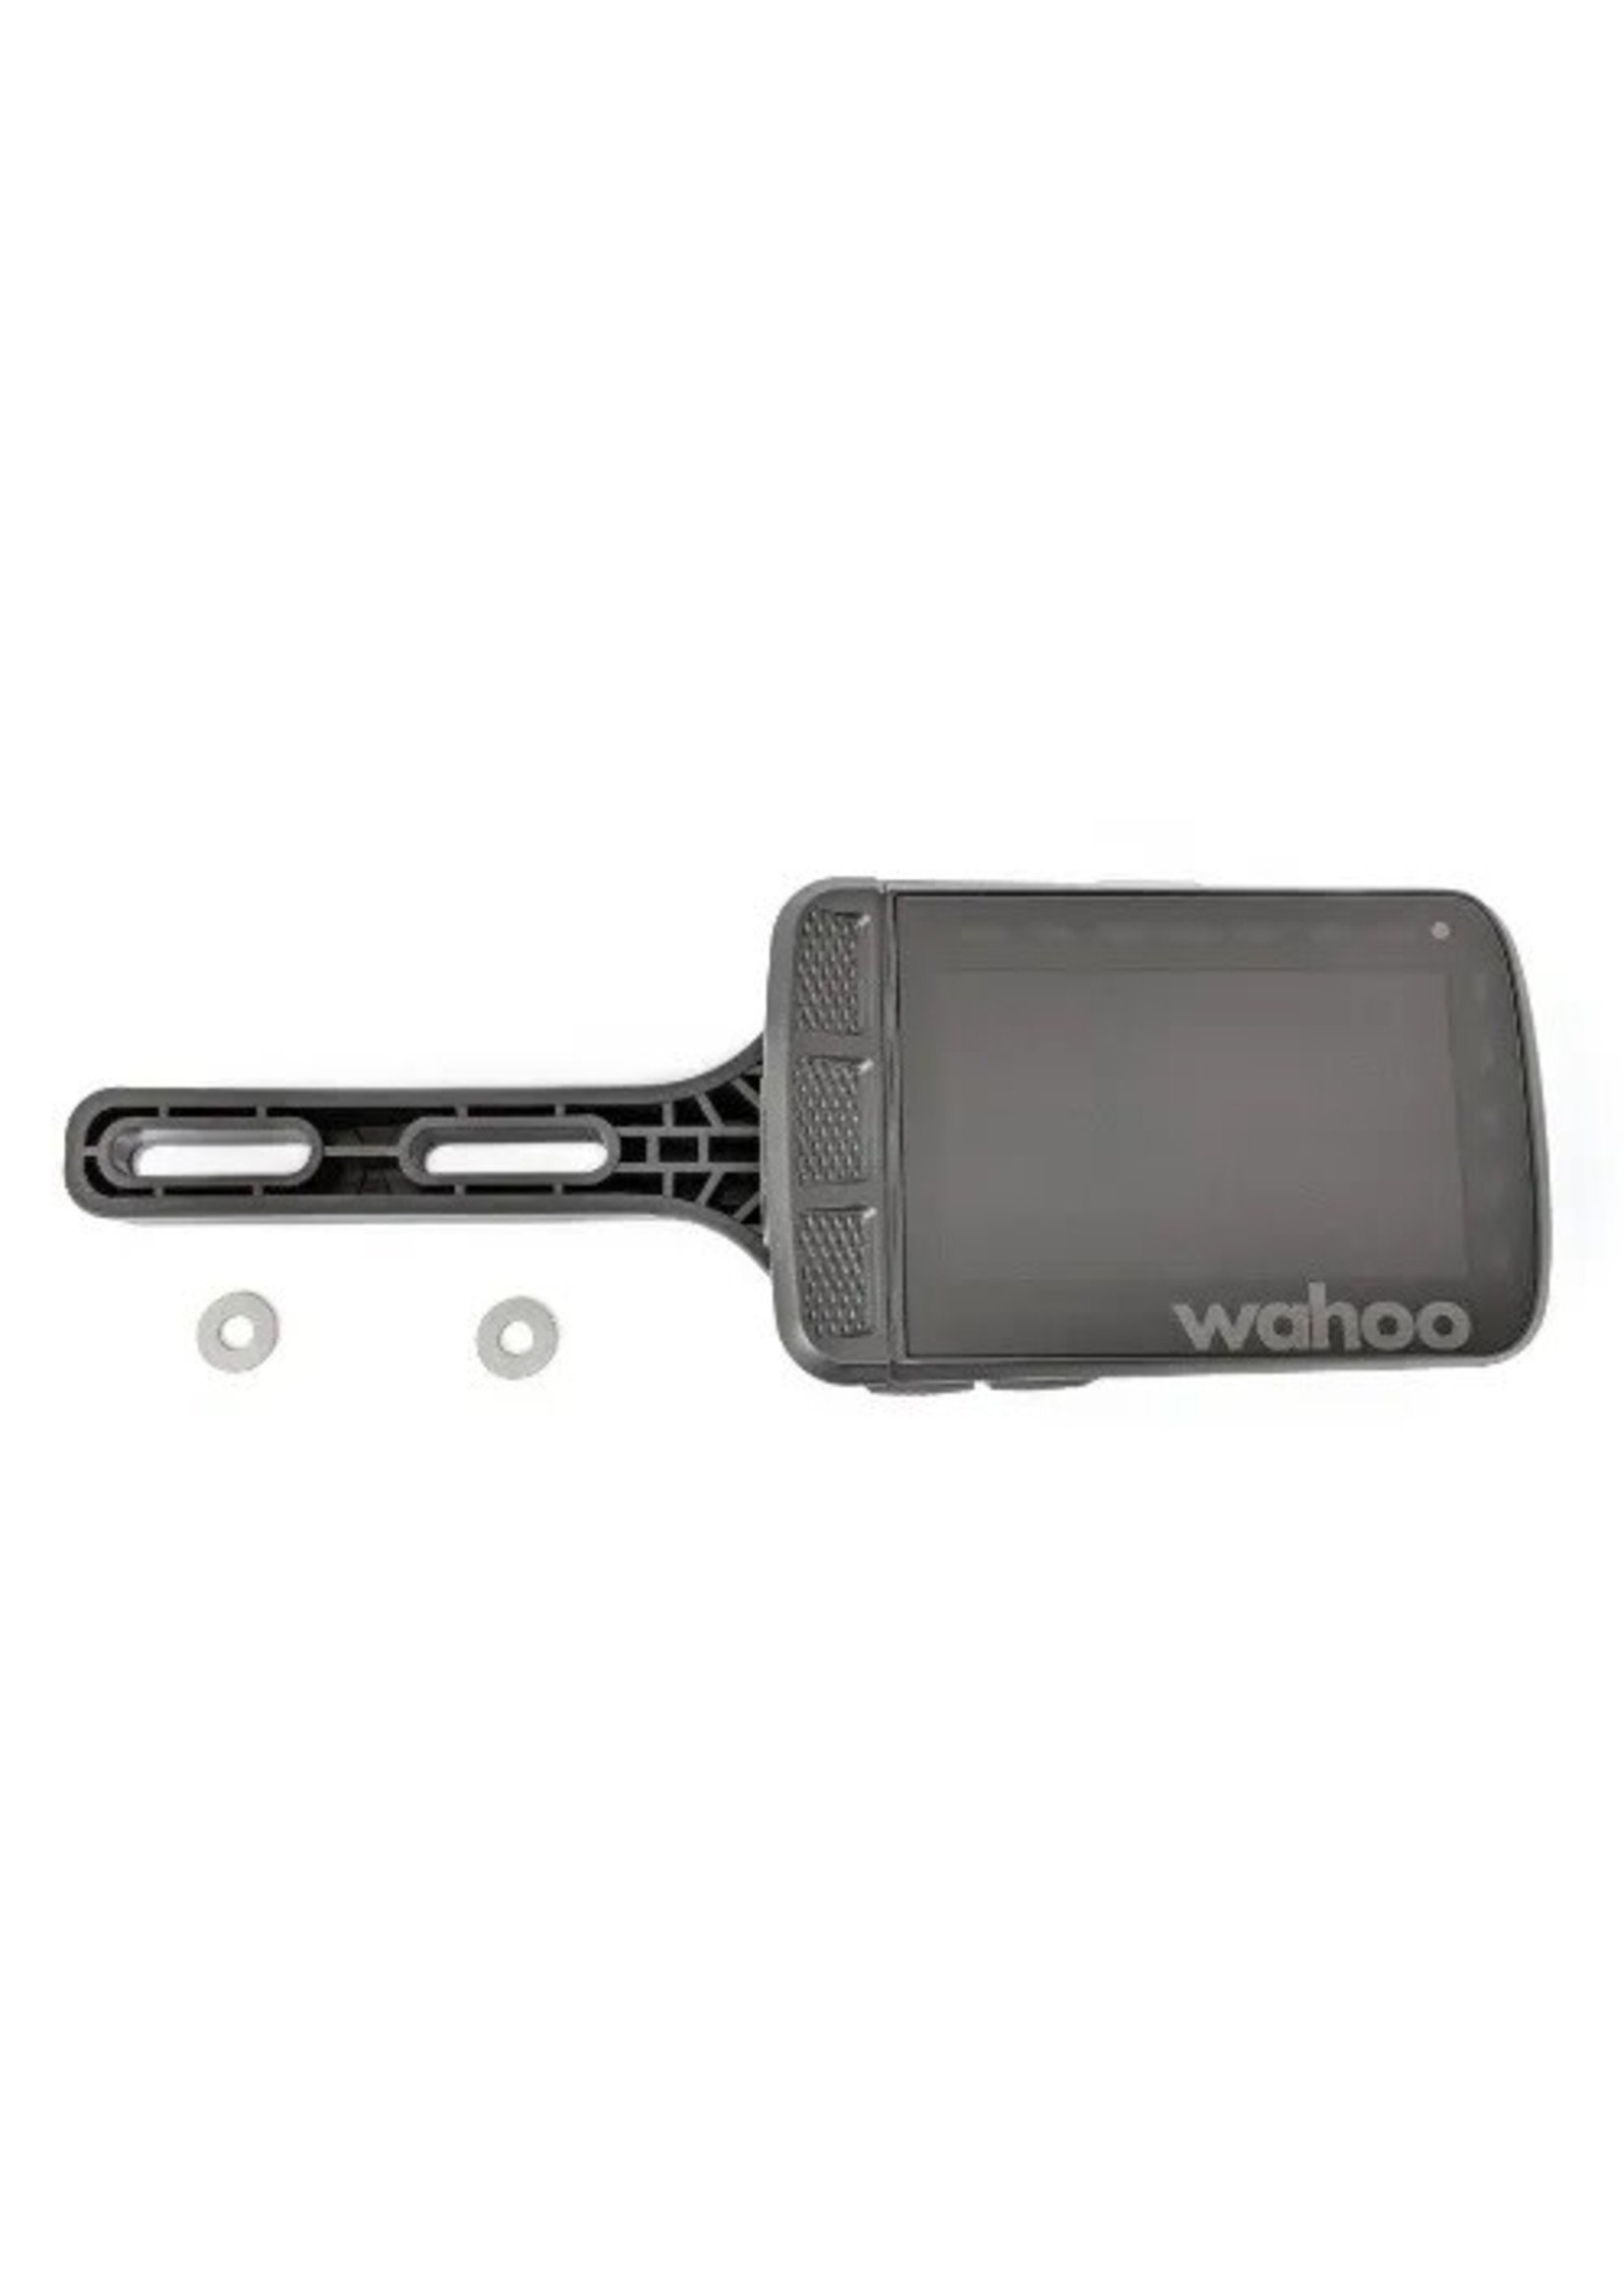 Wahoo Fitness Wahoo Elemnt Roam - 2 bolt out front mount